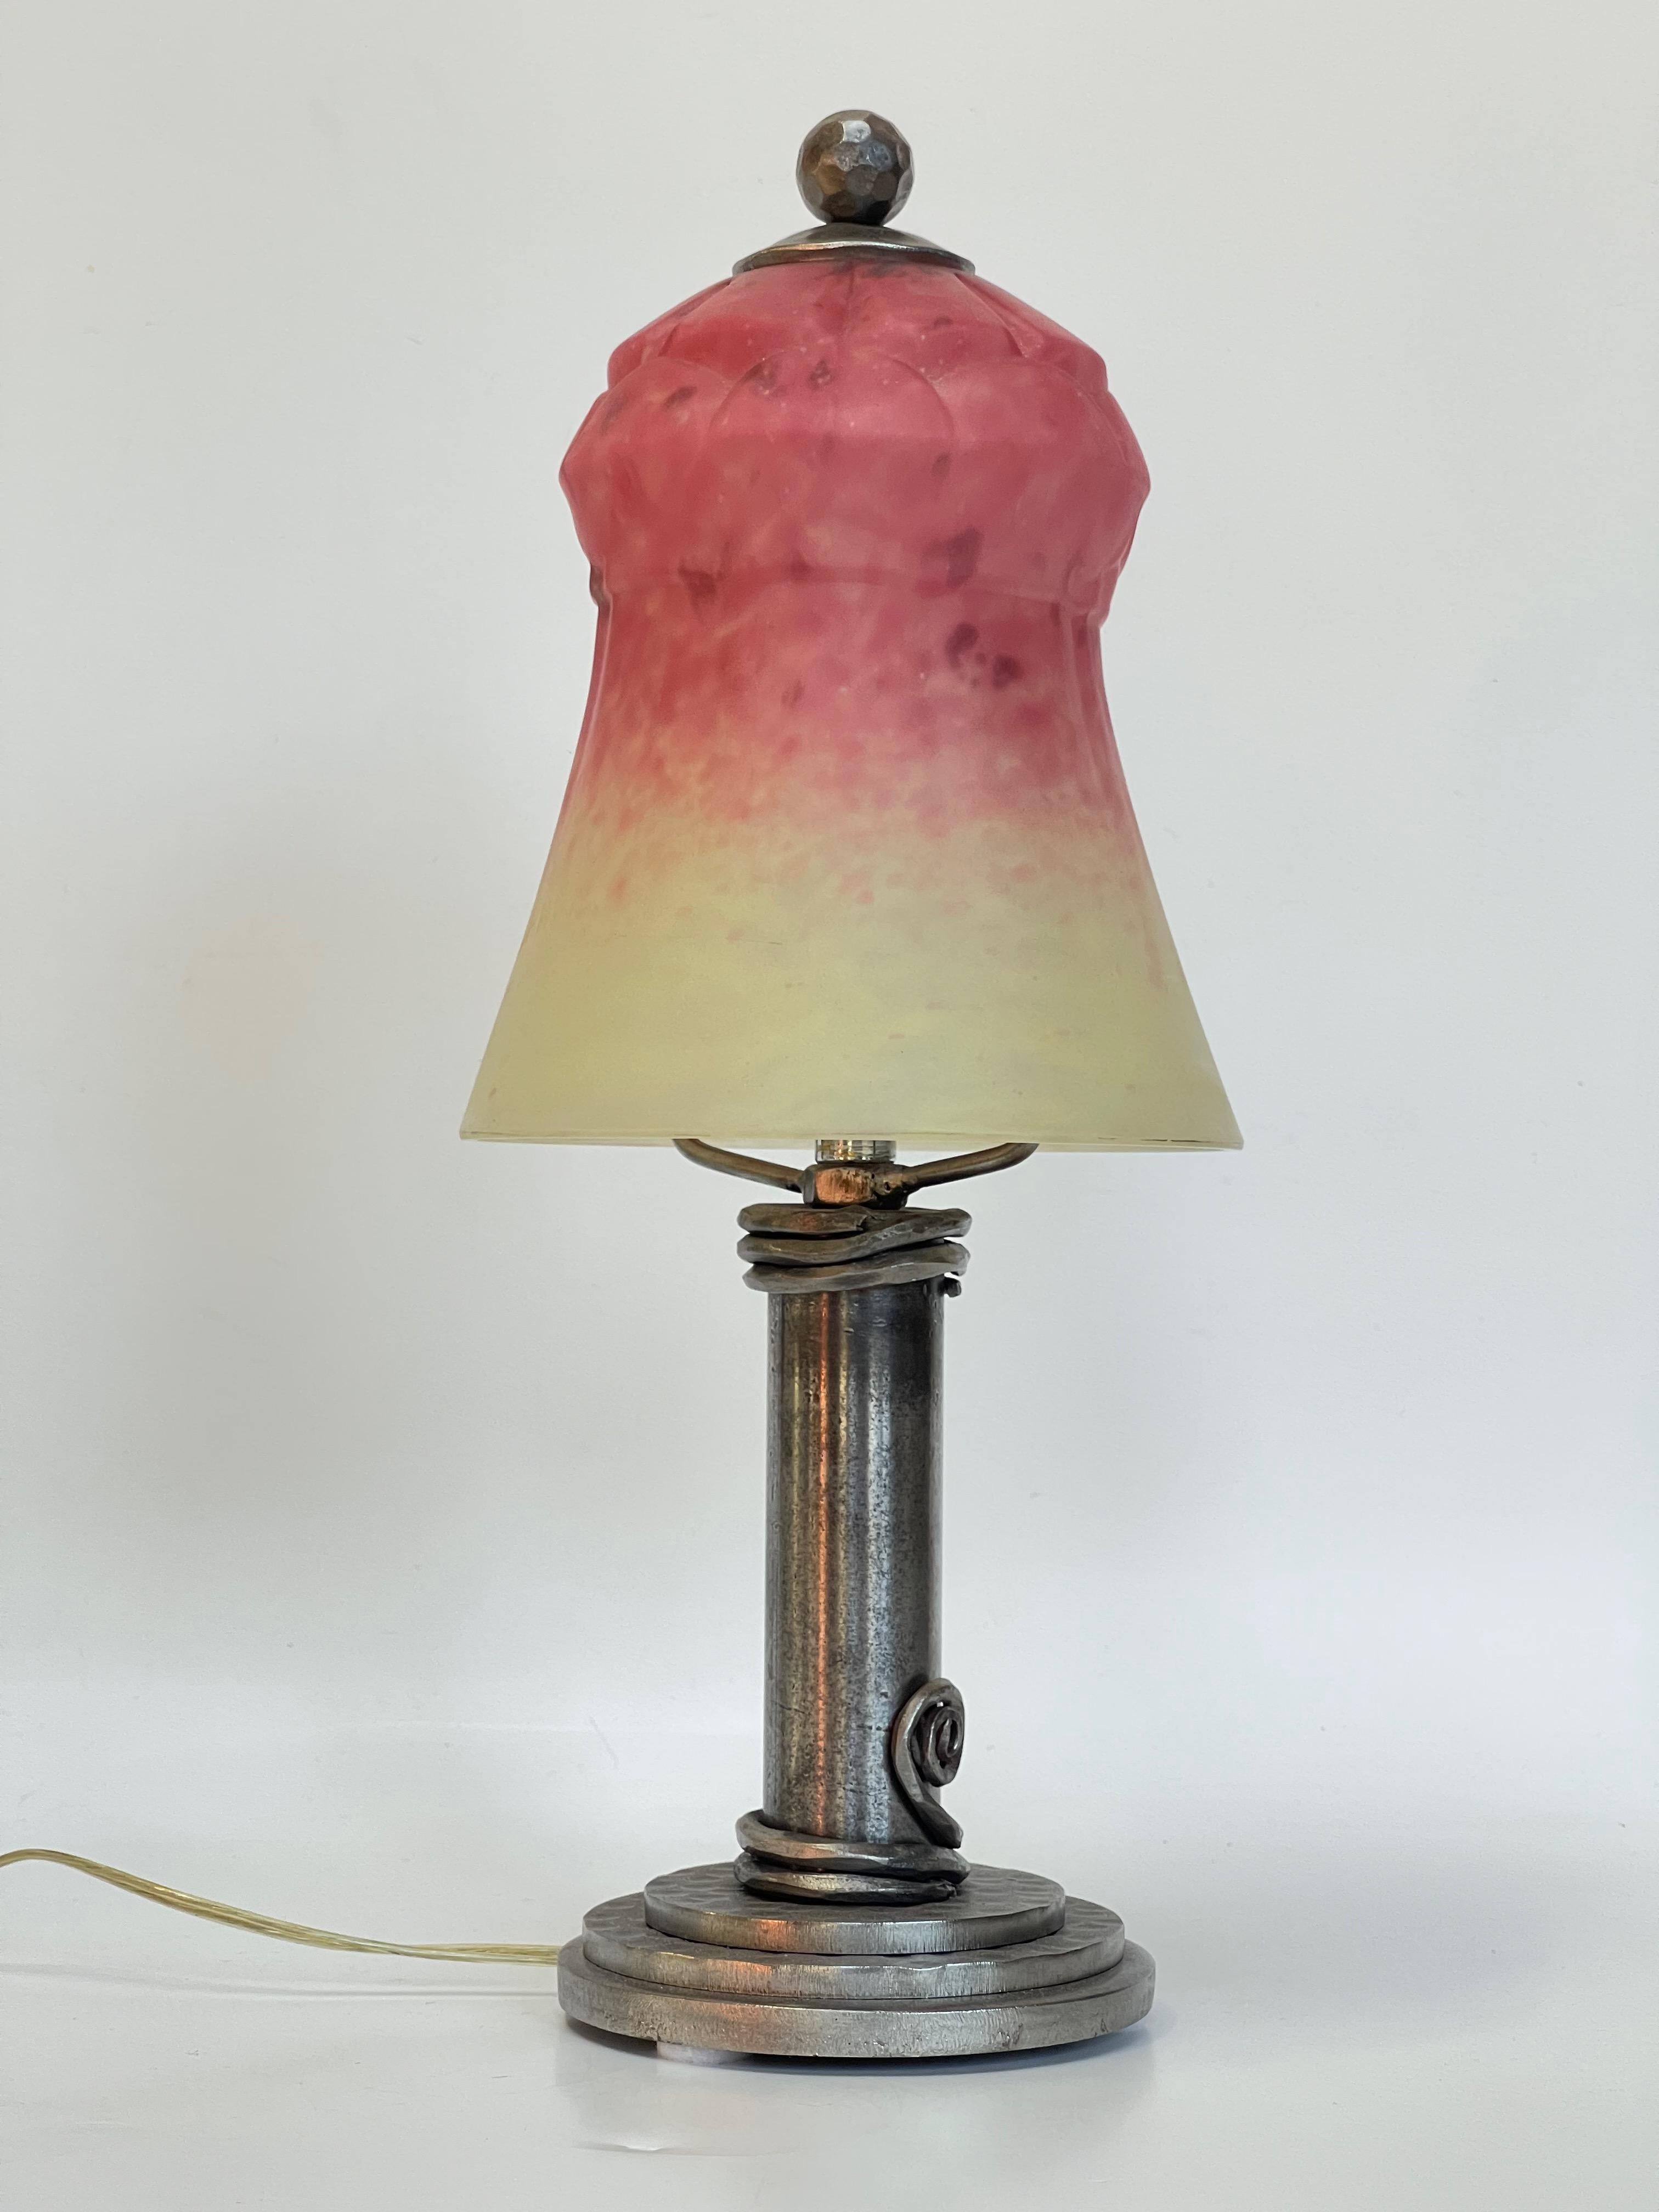 Lamp around 1930 wrought iron foot and tulip in molded blown glass paste signed Schneider in raspberry color and brown speckled cream the lamp is electrified and in perfect condition.
The signature is impossible to photograph. It is visible against